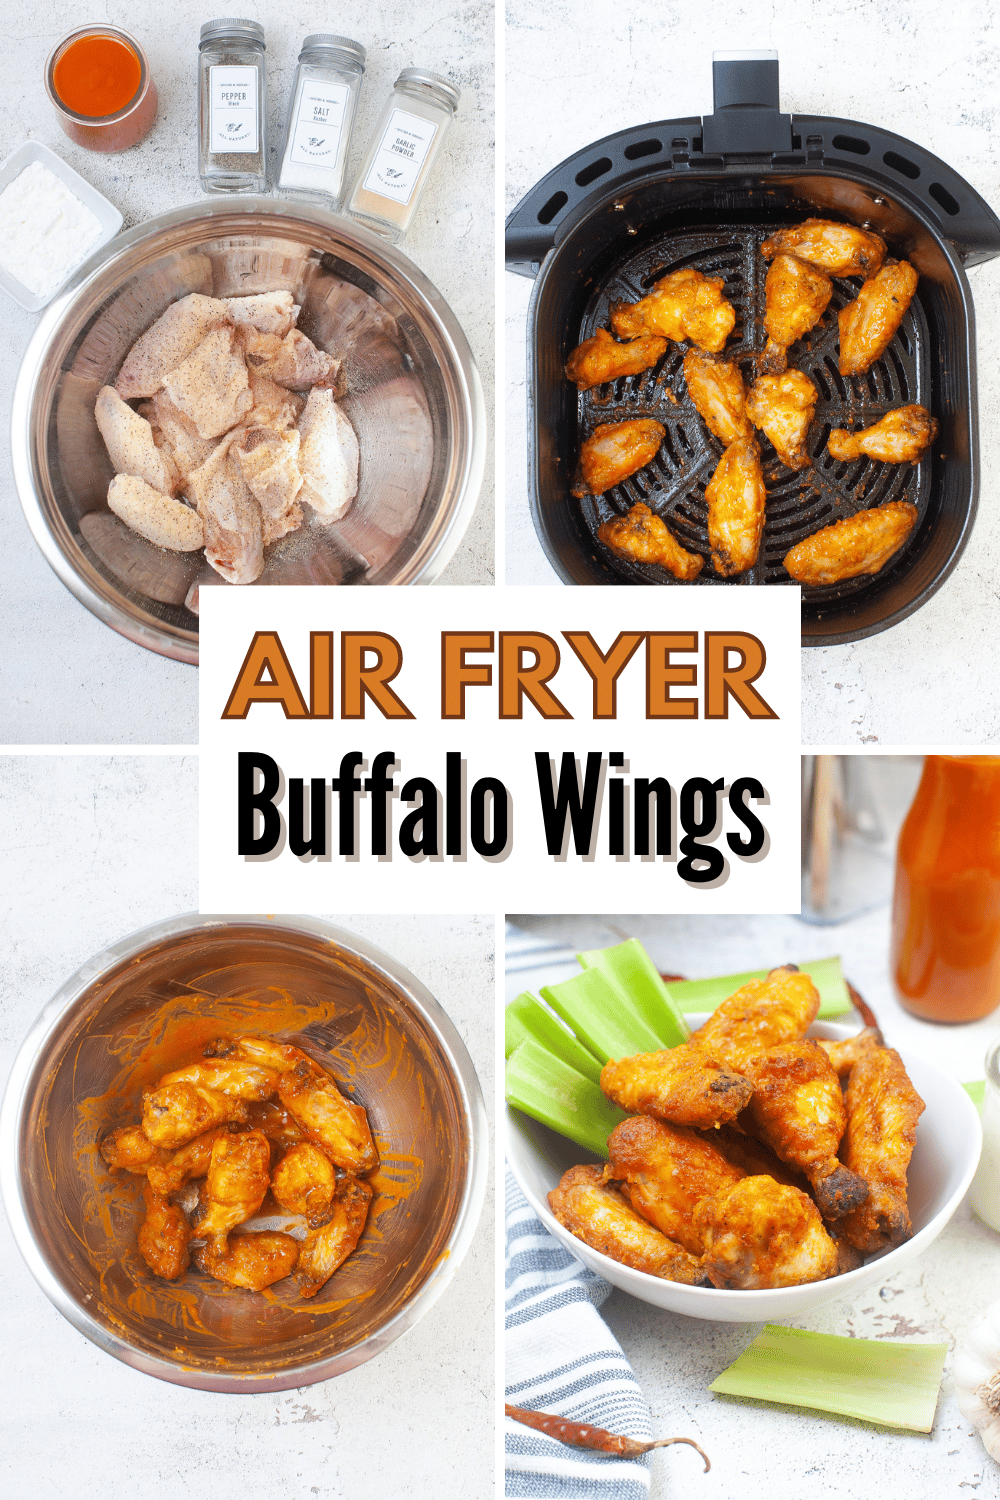 These Air Fryer Buffalo Wings are crispy, juicy, and full of flavor! They are the perfect appetizer or main dish for any party. #airfryerbuffalowings #airfryer #buffalowings #appetizer #recipe via @wondermomwannab